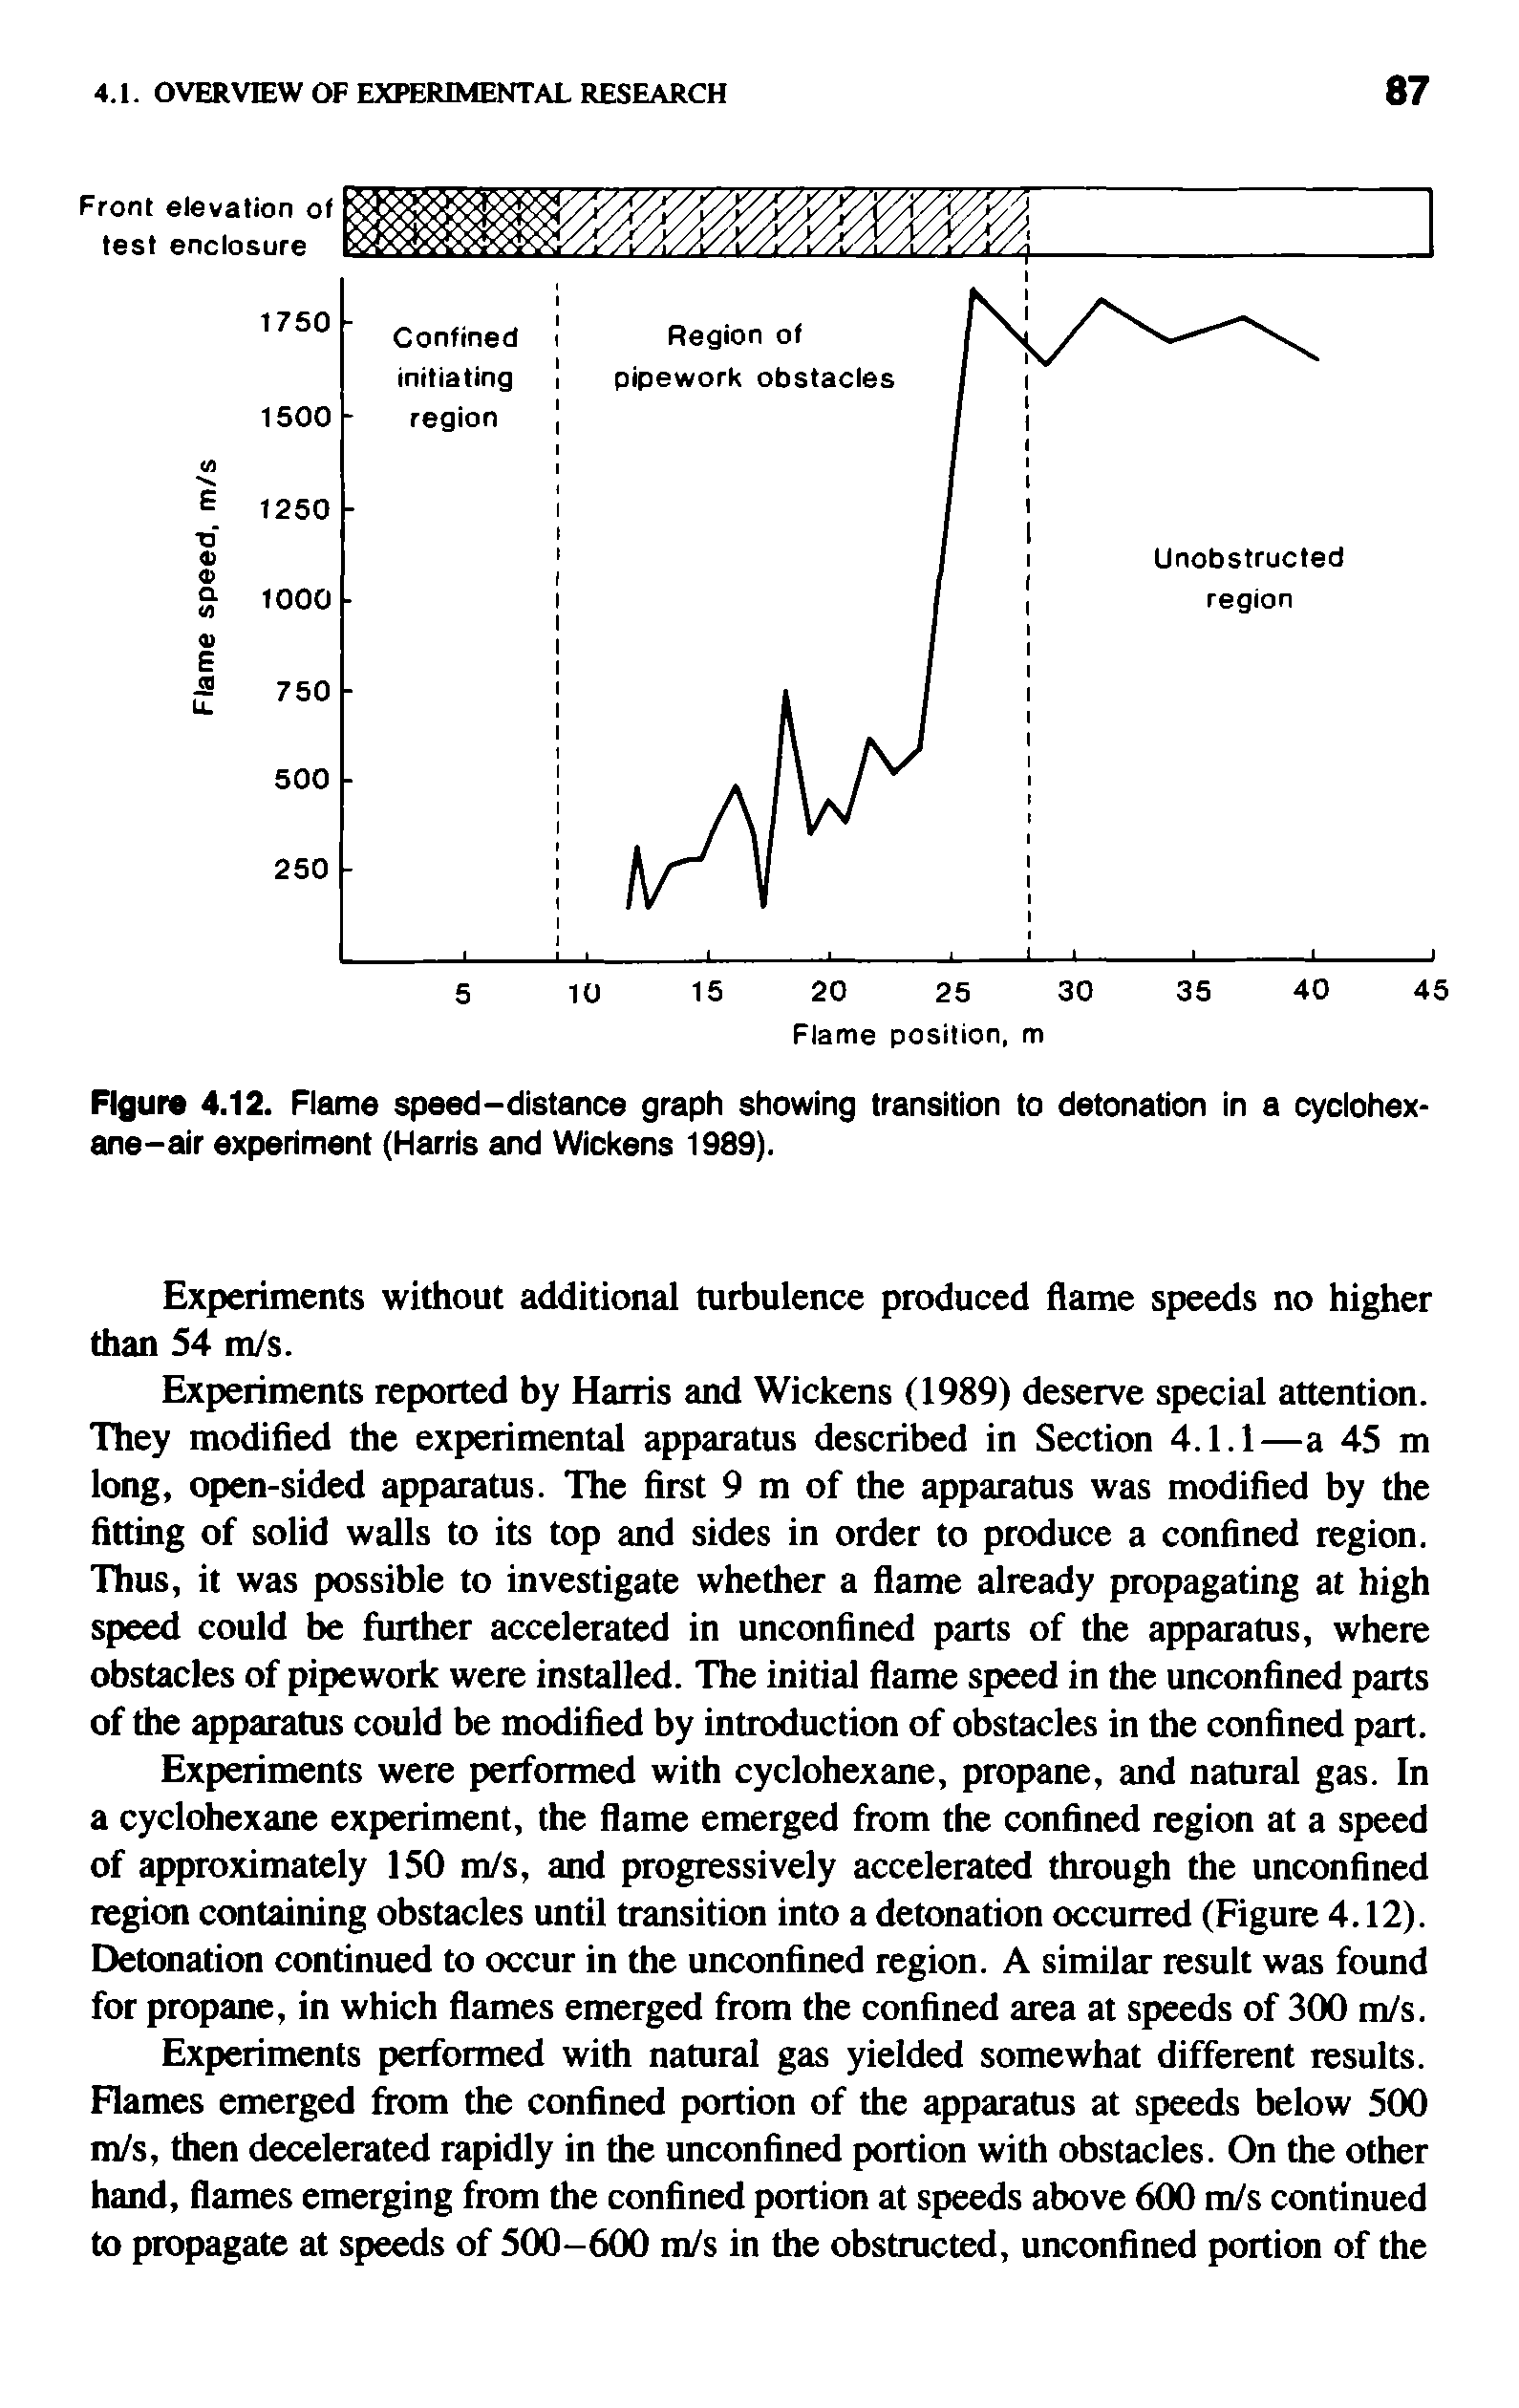 Figure 4.12. Flame speed-distance graph showing transition to detonation in a cyclohexane-air experiment (Harris and Wickens 1989).